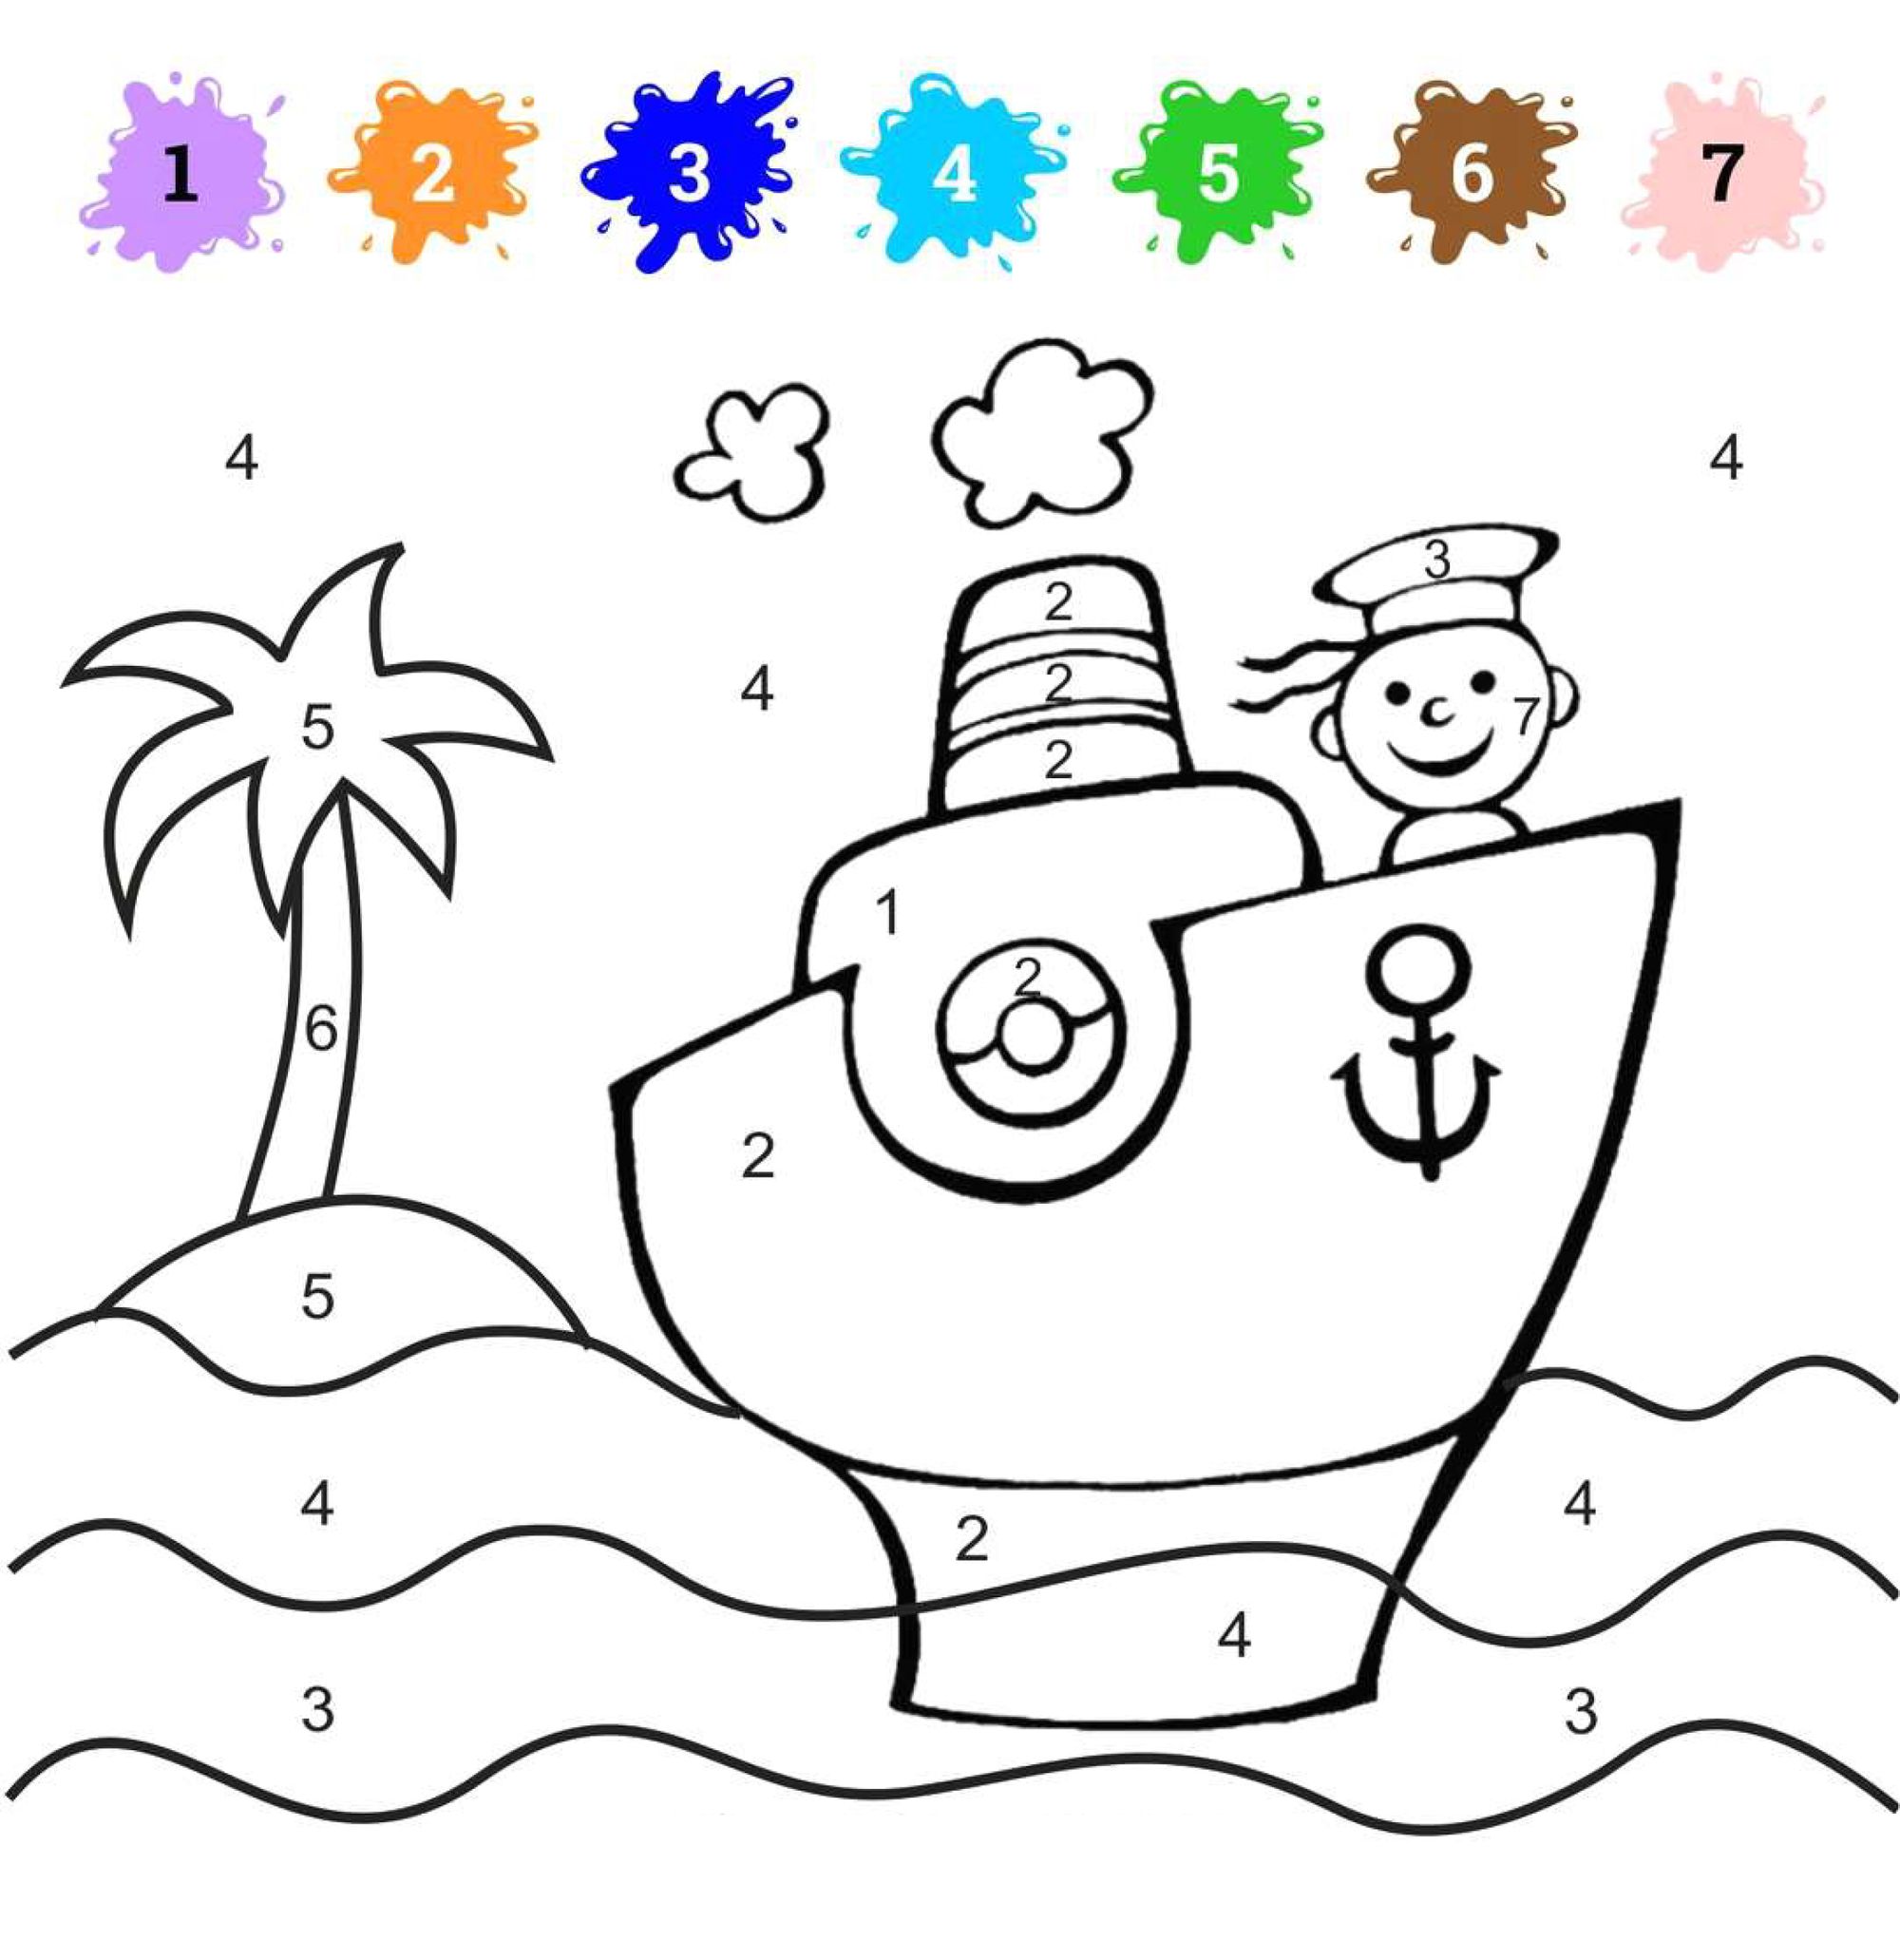 Coloring by Numbers for Children